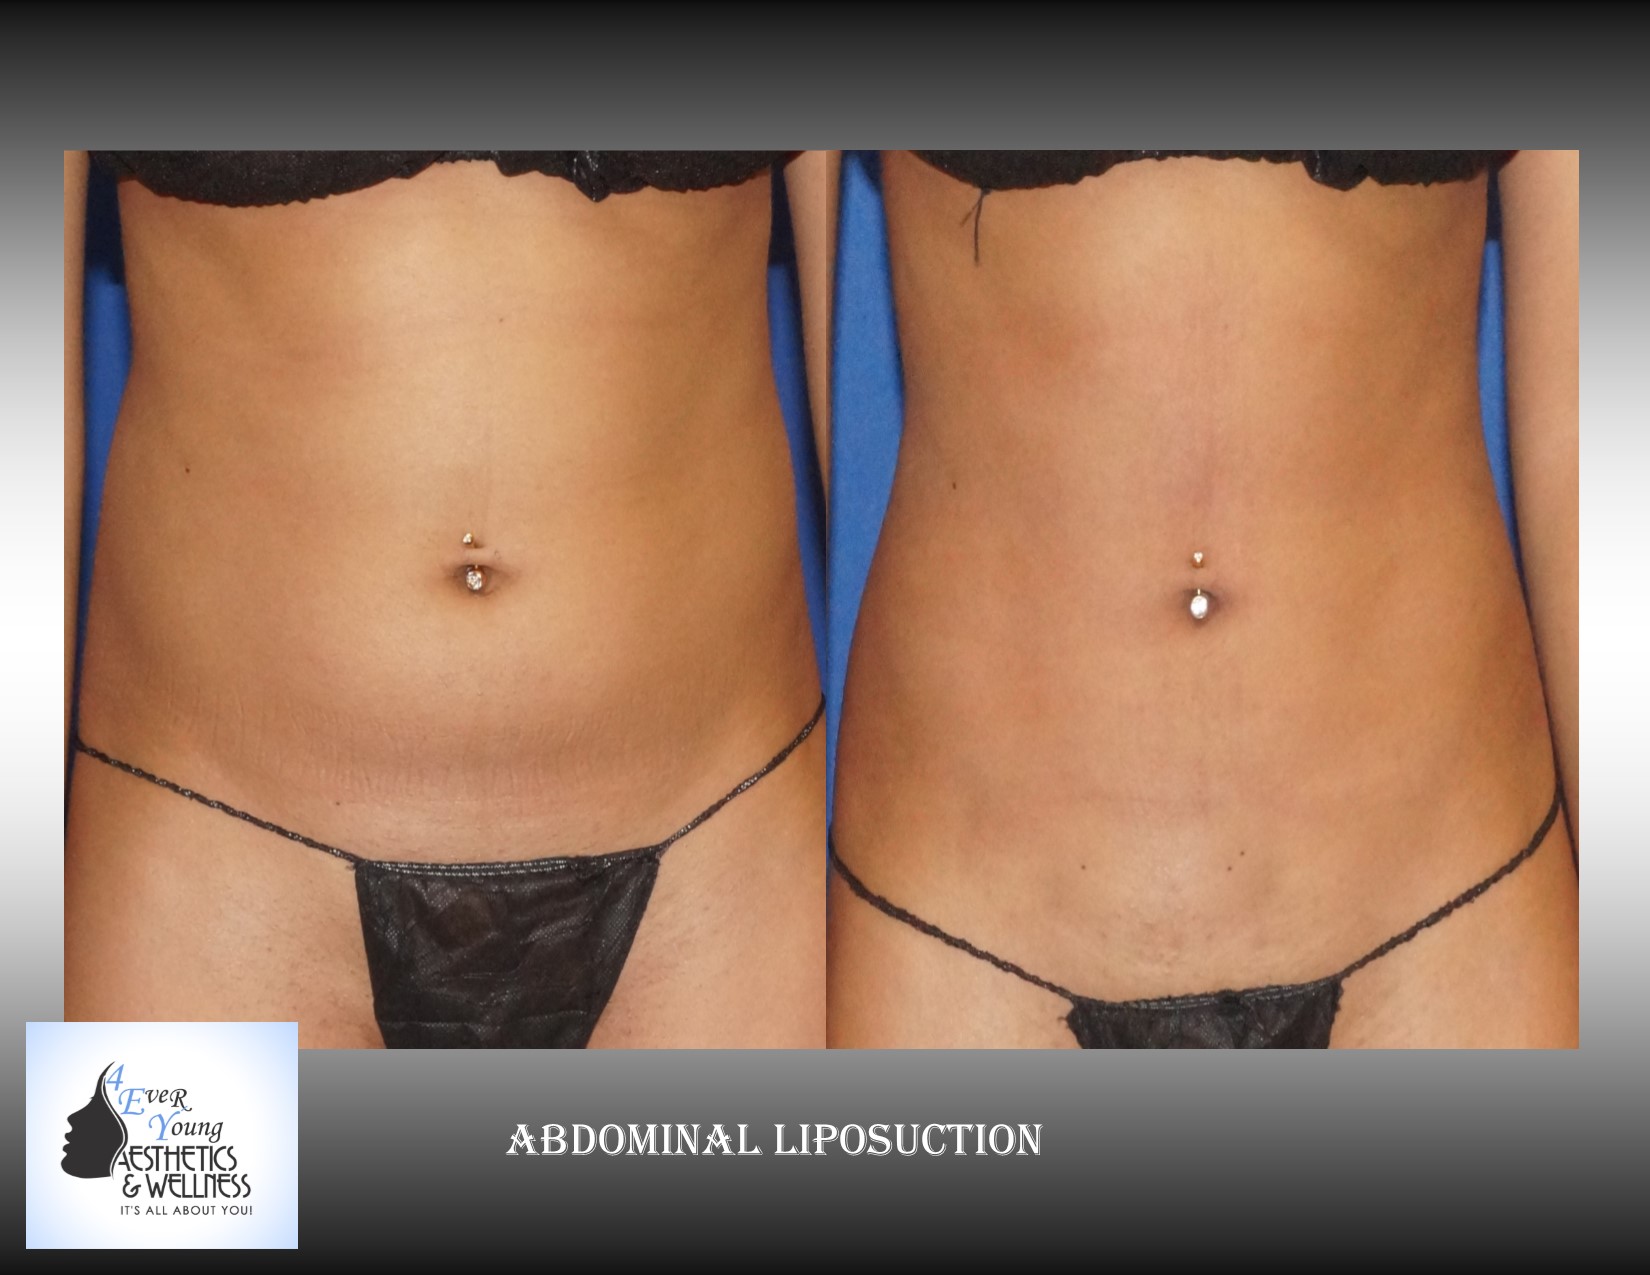 Liposuction is performed using tumescent anesthesia and traditional liposuction plastic surgery.  We are experts in laser liposuction (smartlipo), vaser liposuction and fat transfer, also known as fat grafting.  Our board-certified cosmetic surgeon is an expert at fat removal with liposuction which is an enhancement surgery and doesn’t fall into the scope of practice of a board-certified plastic surgeon who is trained in reconstructive surgery.  Board-certified plastic surgeons with experience in liposuction are certainly qualified to perform the procedure but being trained strictly in plastic surgery is misleading.  We use abdominal liposuction, flank liposuction, back liposuction, arm liposuction, thigh liposuction and ankle liposuction to remove unsightly fat from problem areas with our tumescent liposuction procedures with or without sedation. If you desire we use autologous fat transfer (fat grafting) to use the fat obtained as the most natural dermal filler unlike synthetic fillers (Restylane, Juvederm, Sculptra, Radiesse, Belotero, Perlane) to improve fine lines and wrinkles of the face, hand rejuvenation with fat, fat transfer to breast, Brazilian Butt Lift (Butt Augmentation), liposculpture, lip augmentation with fat.  Fat transfer to the breast can be a great alternative to breast augmentation, saline implants, silicone implants, breast augmentation with mastopexy or just to improve volume in the upper pole of the breast.    